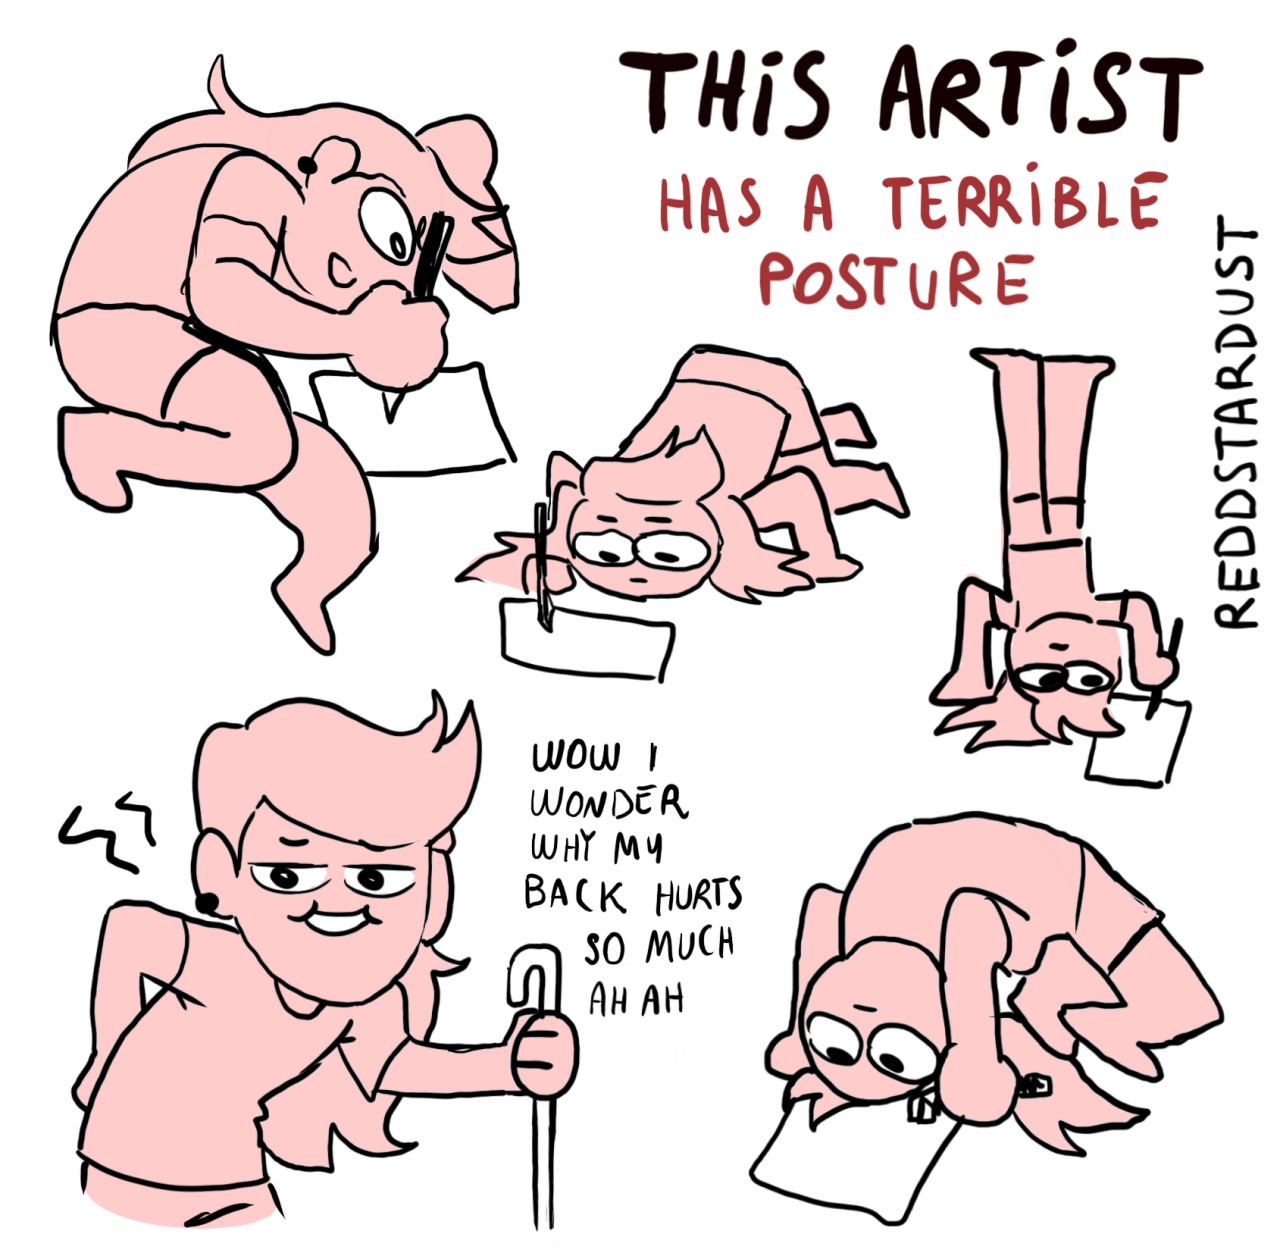 Sex reddstardust:Types of artists (but it’s pictures